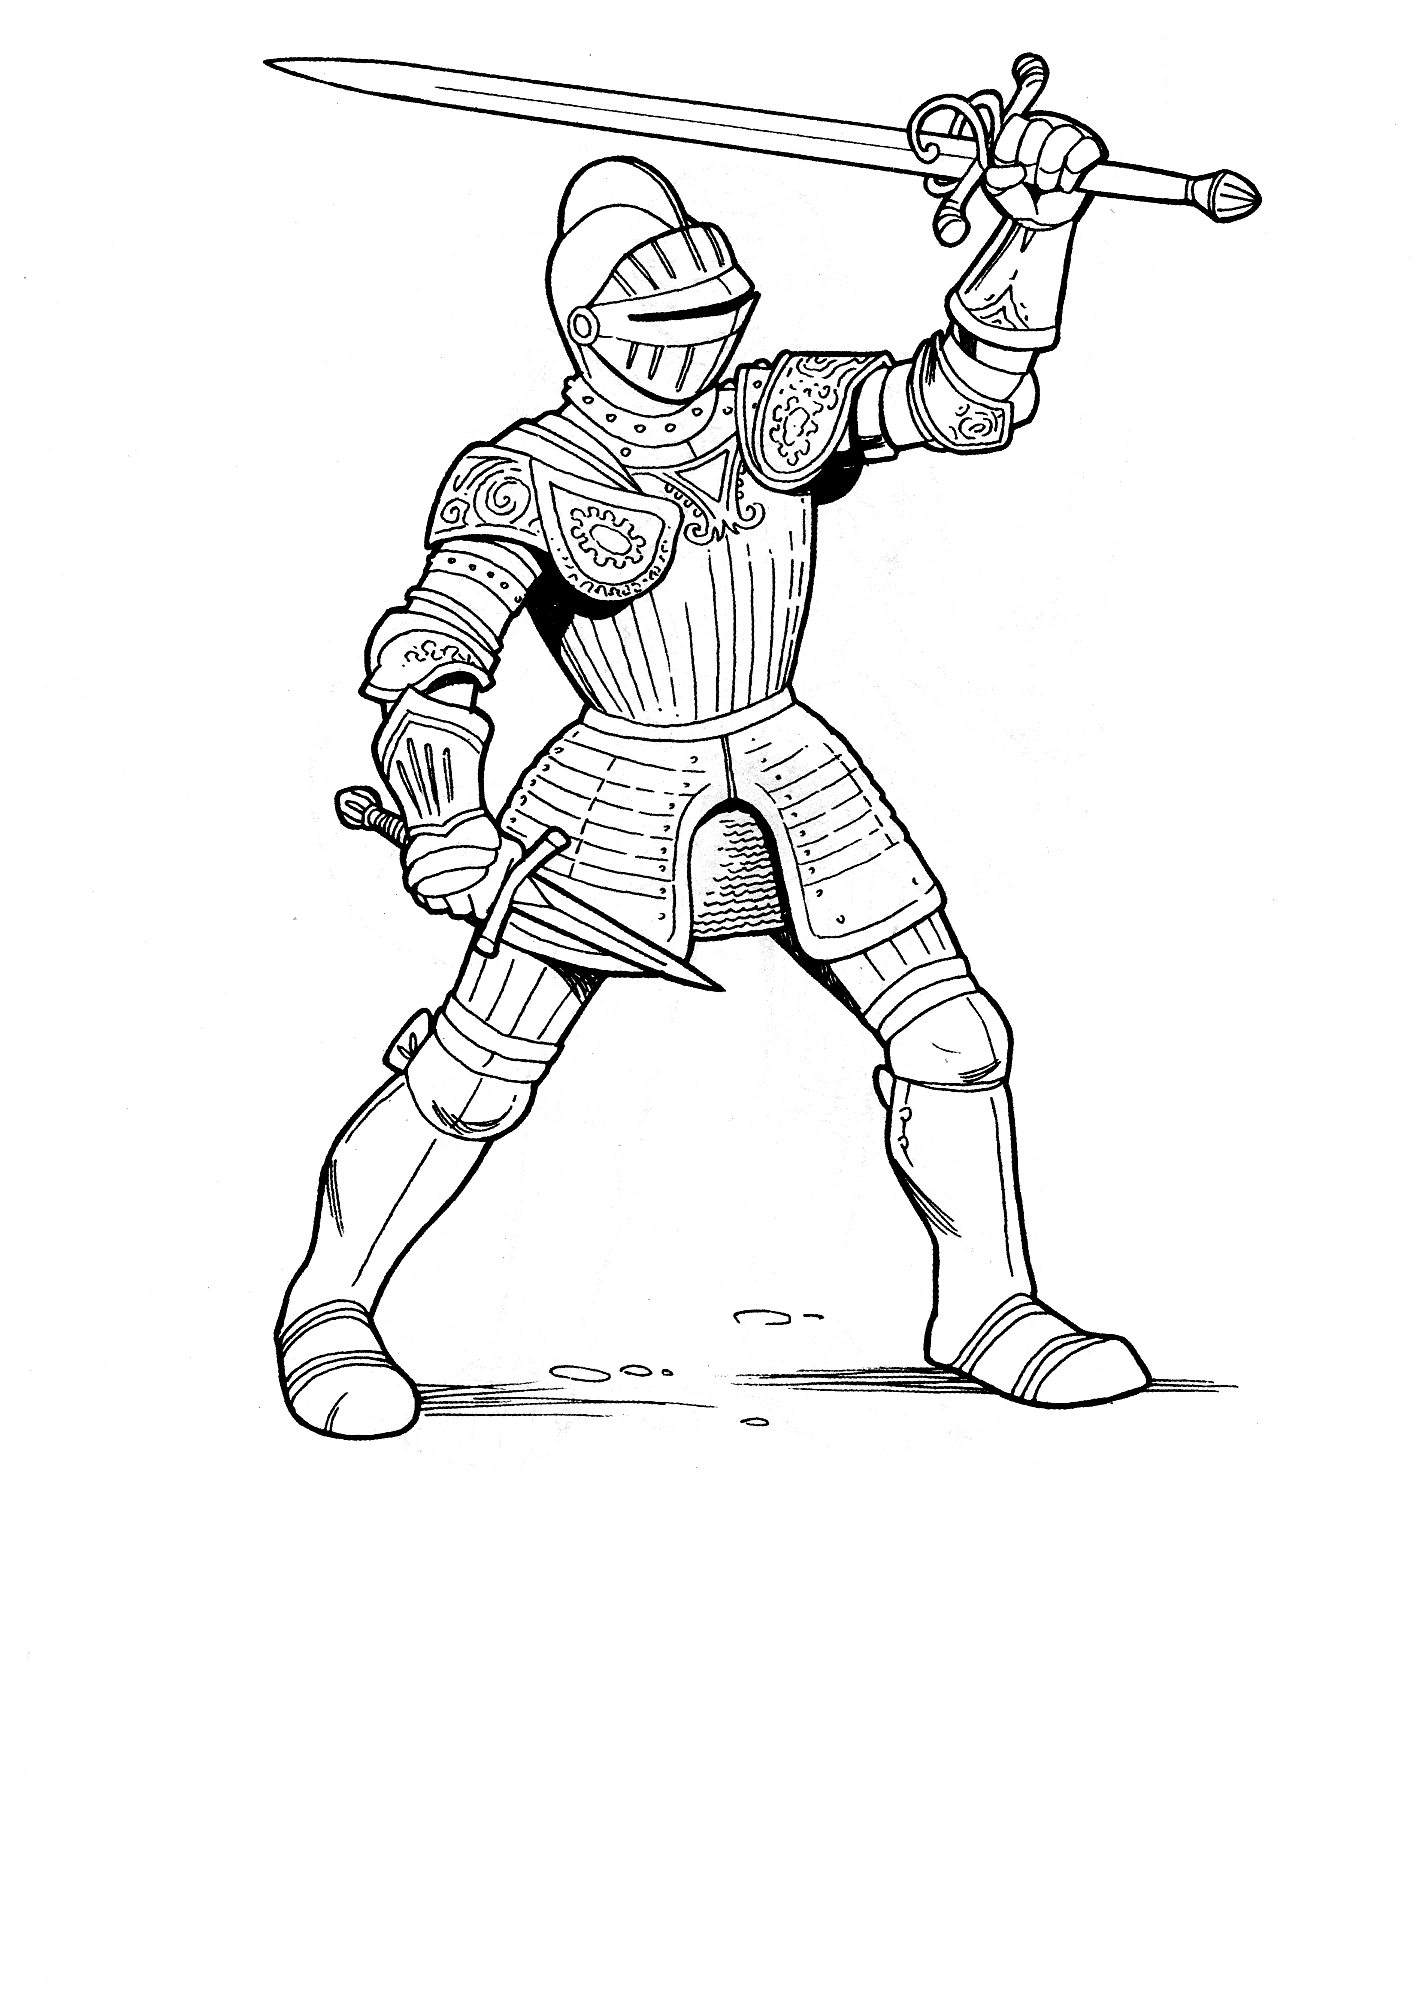 Knight Coloring Pages To Download And Print For Free - Coloring Home